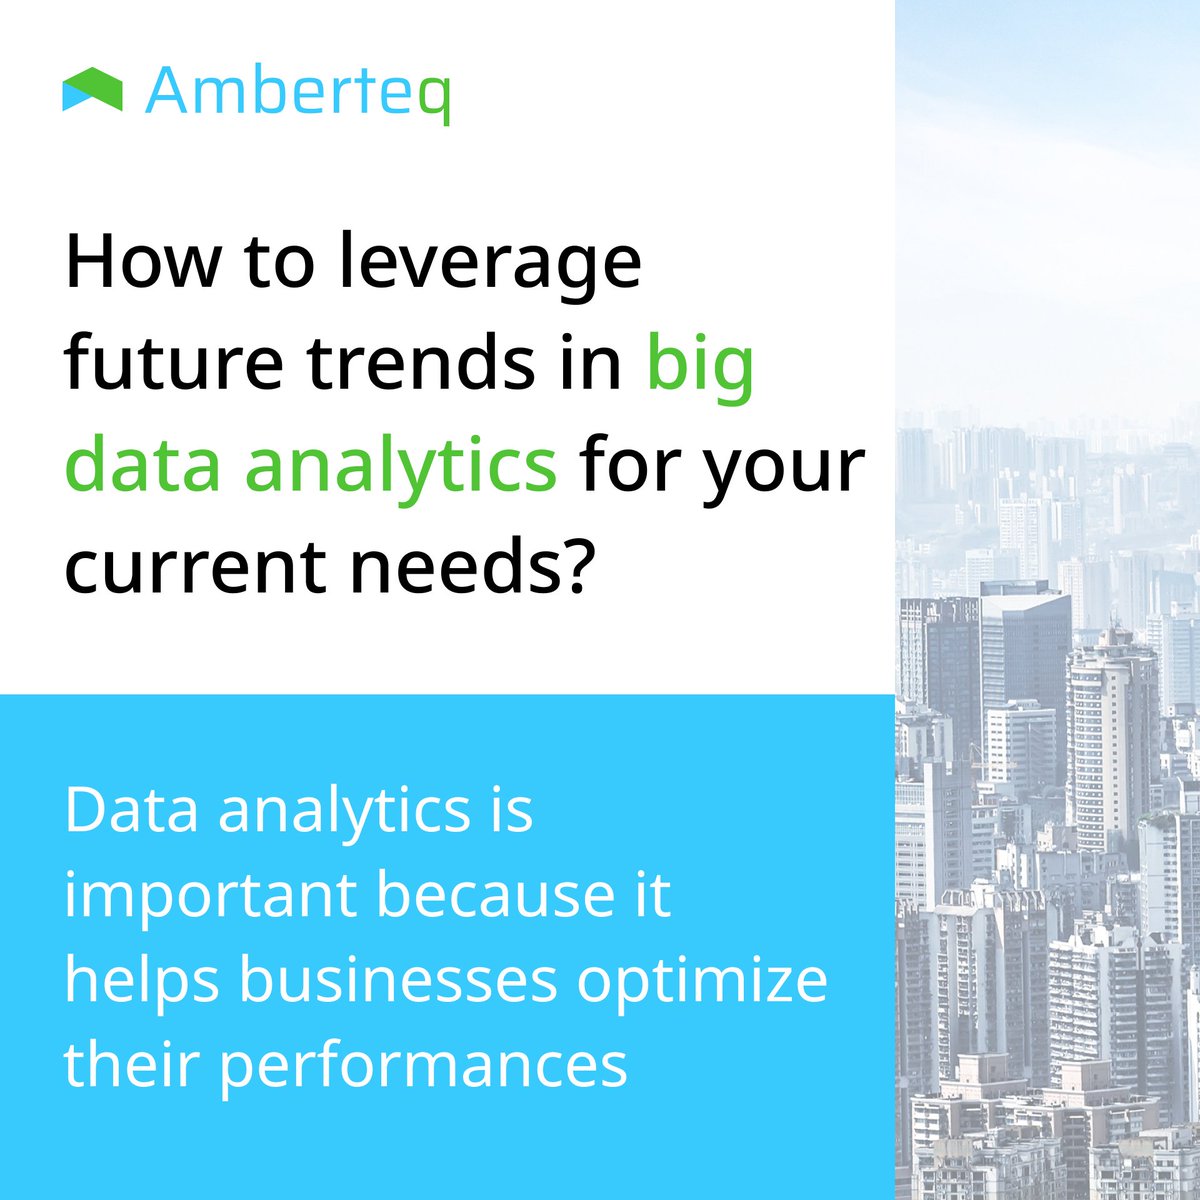 Our team can help you start off right with resources, insights, and strategies on how to design a robust analytics architecture. 

amberteq.com/contact-us/ 

#DataAnalytics #Data #BigData #AnalyticsArchitecture #Business #analytics #DataAnalyticsTrends #AnalyticsInsights